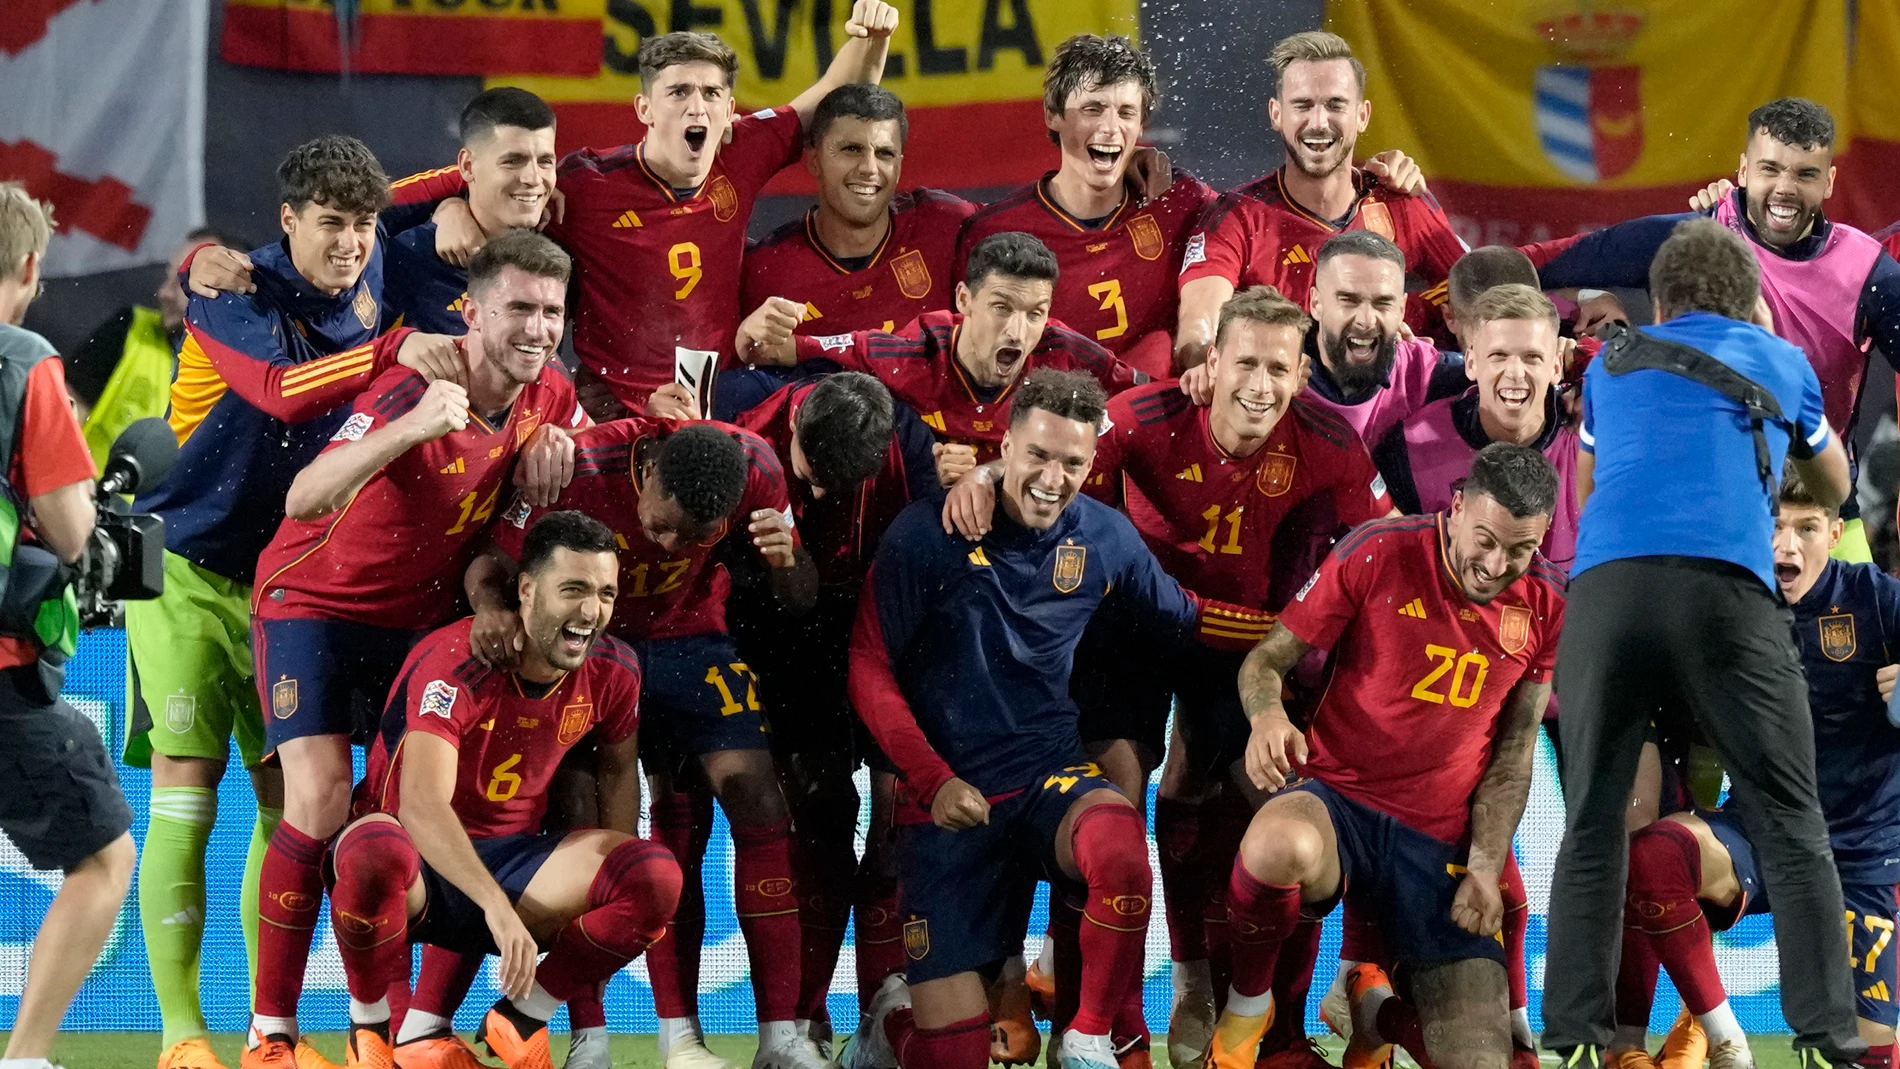 Spain players pose for the cameras celebrating at the end of the Nations League semifinal soccer match between Spain and Italy at De Grolsch Veste stadium in Enschede, eastern Netherlands, Thursday, June 15, 2023. Spain won 2-1. (AP Photo/Peter Dejong)